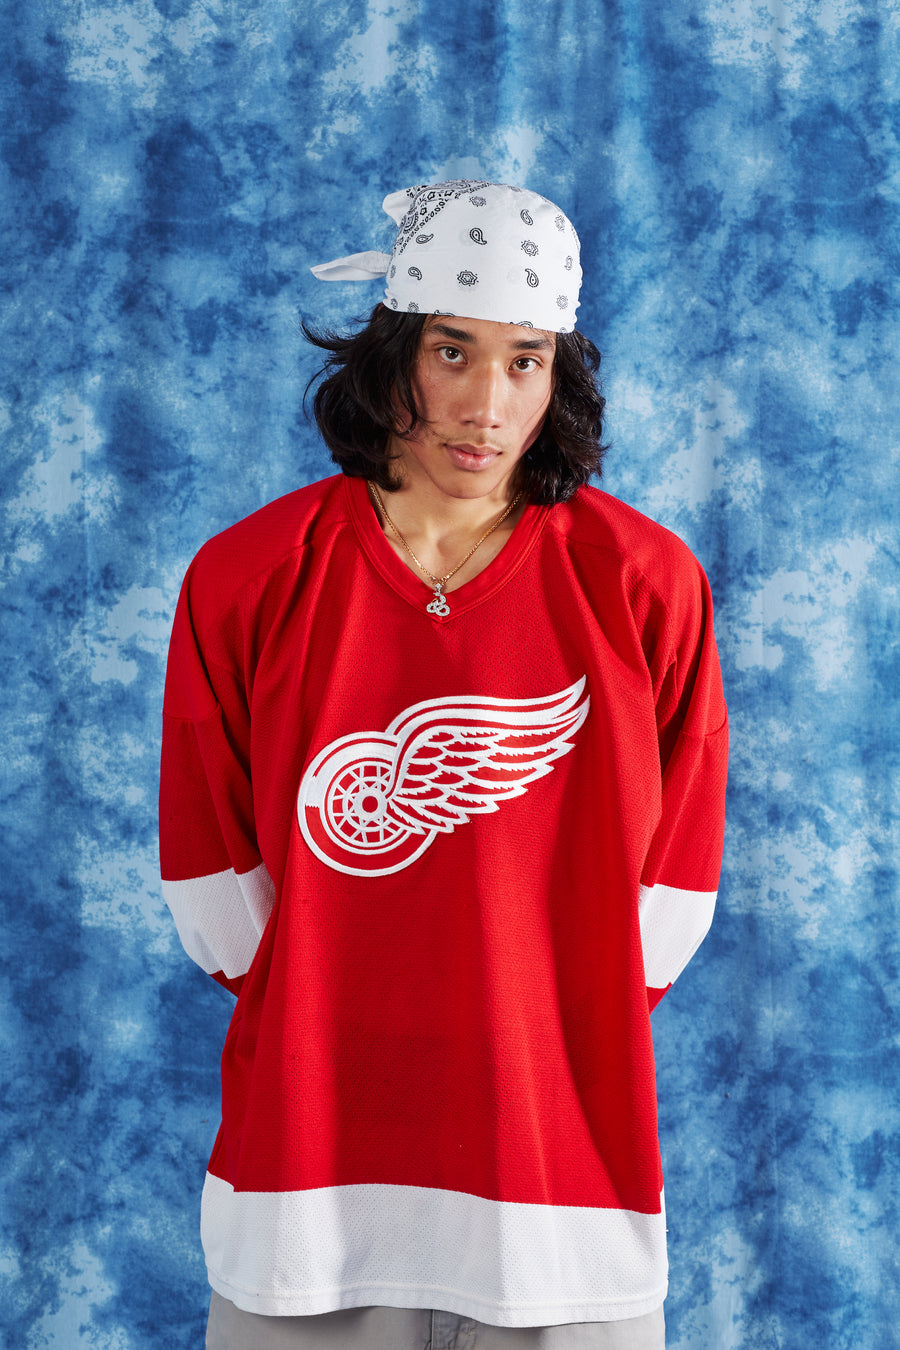 80's Detroit Red Wings Jersey in a vintage style from thrift store Twise Studio